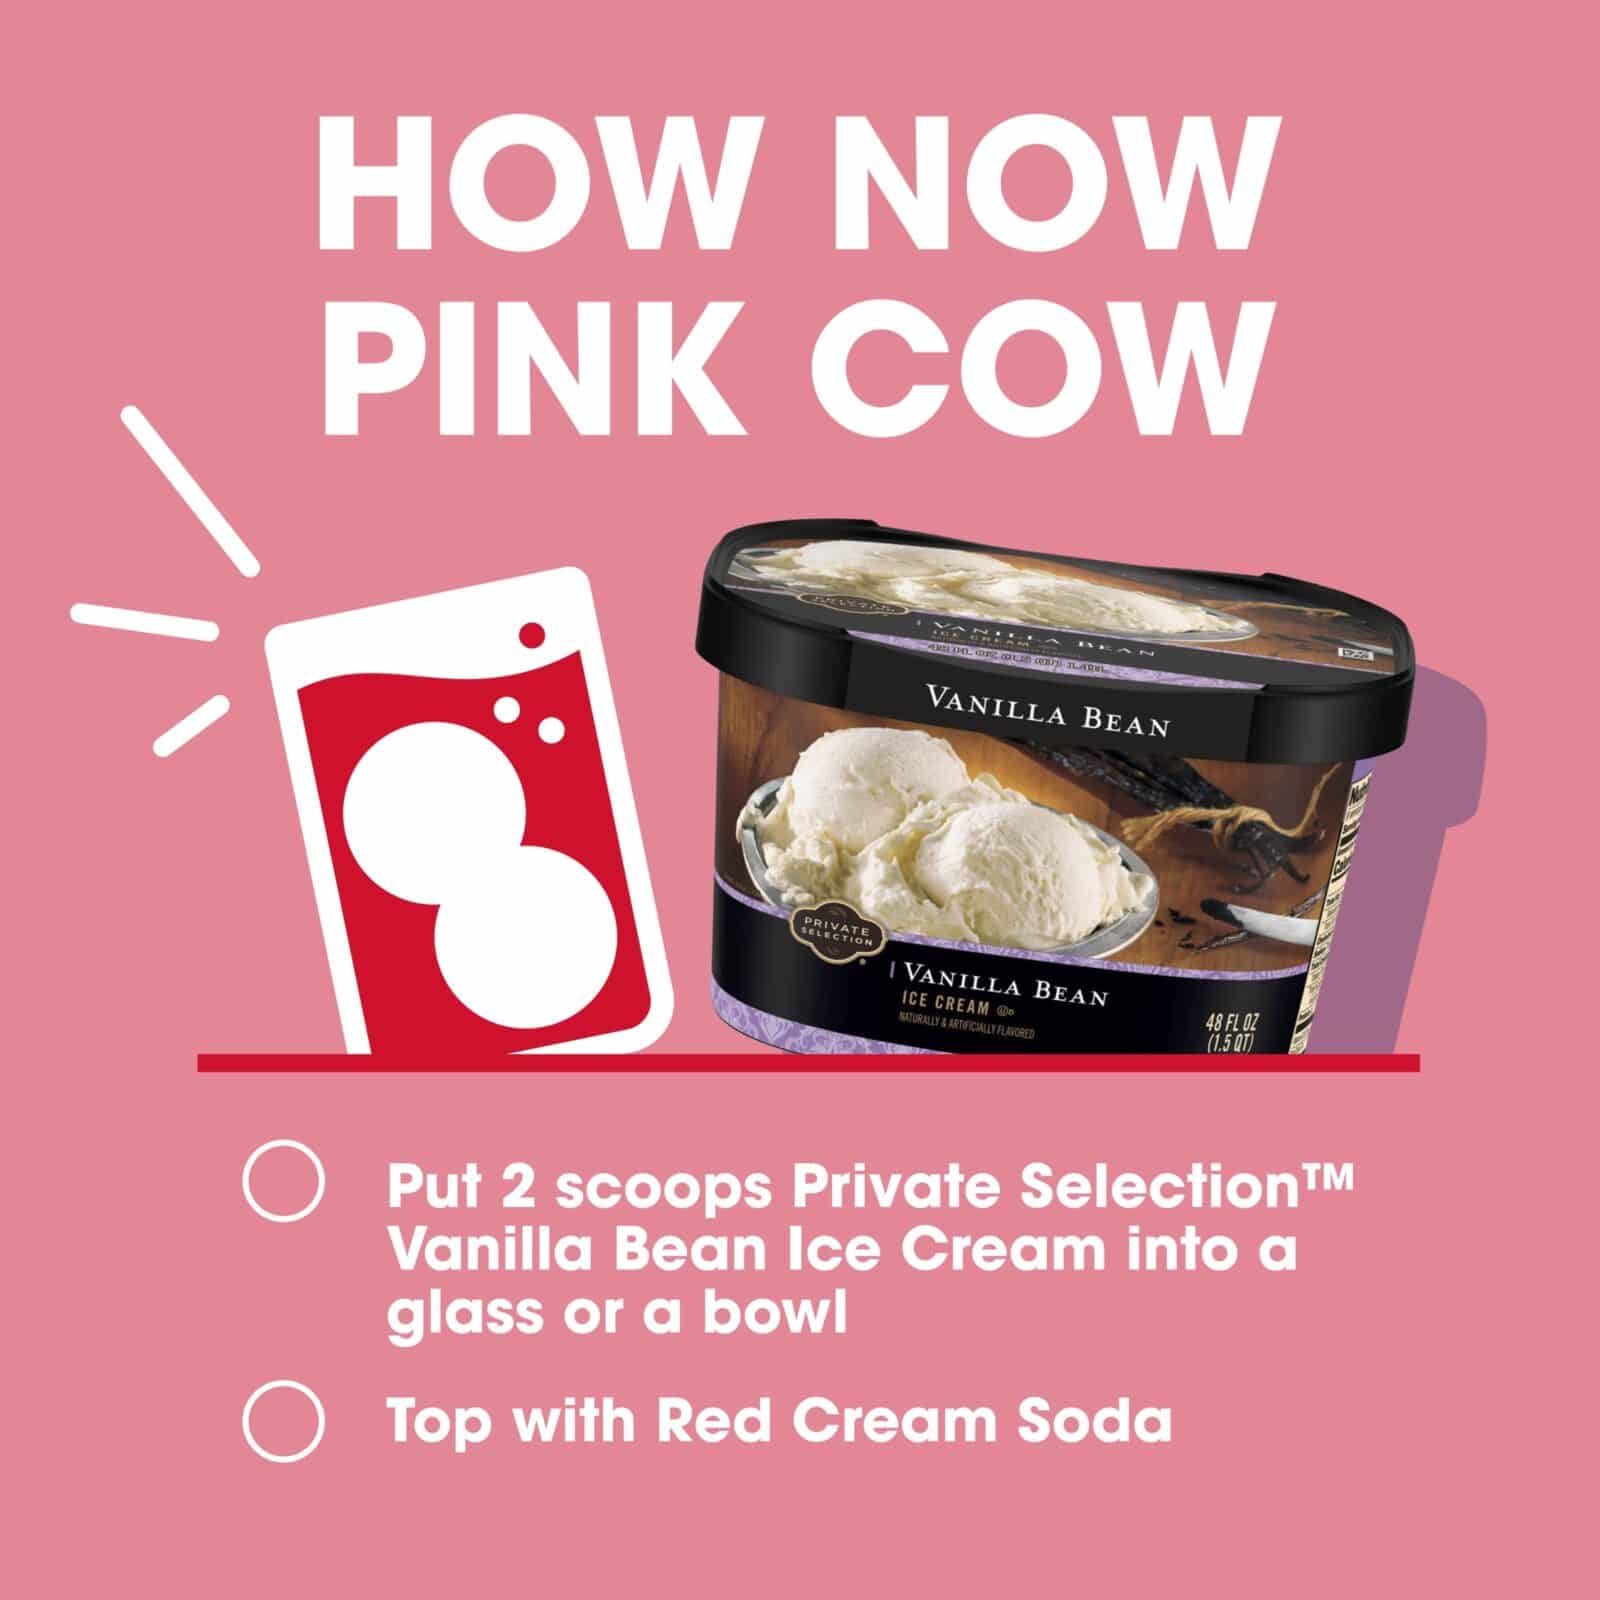 How Now Pink Cow